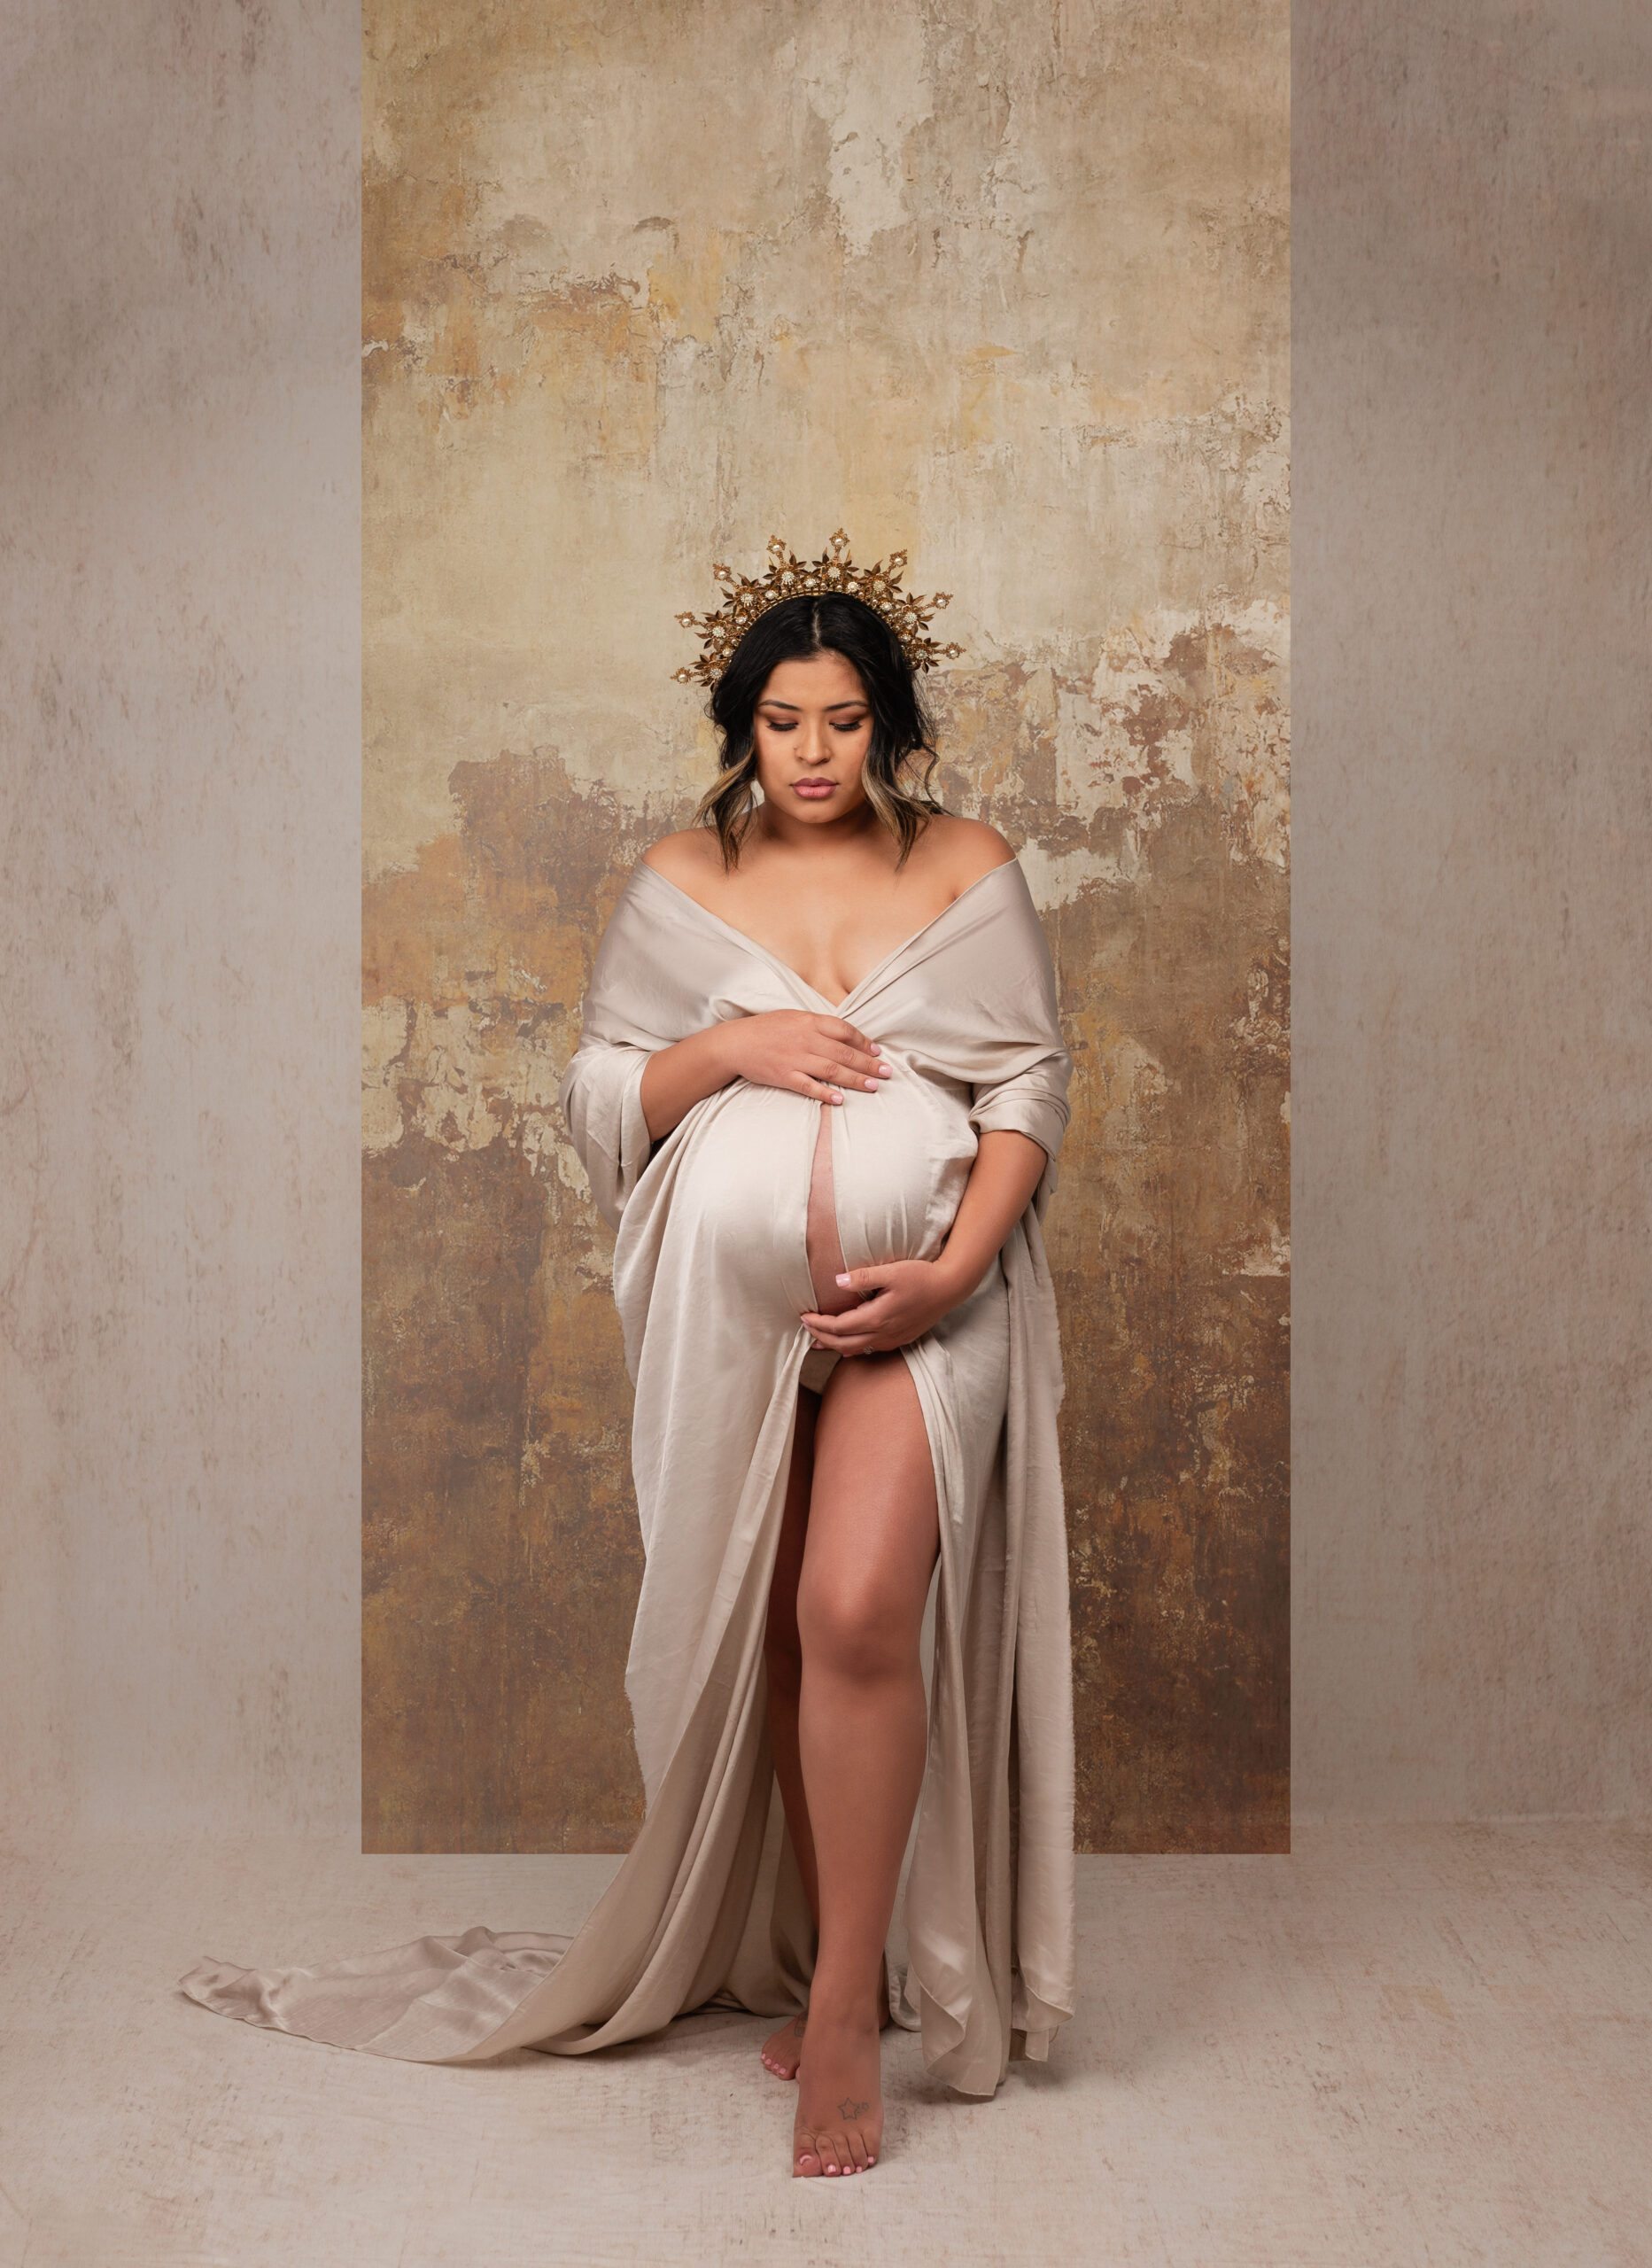 grand rapids maternity session pregnant woman holding her belly with gold crown on